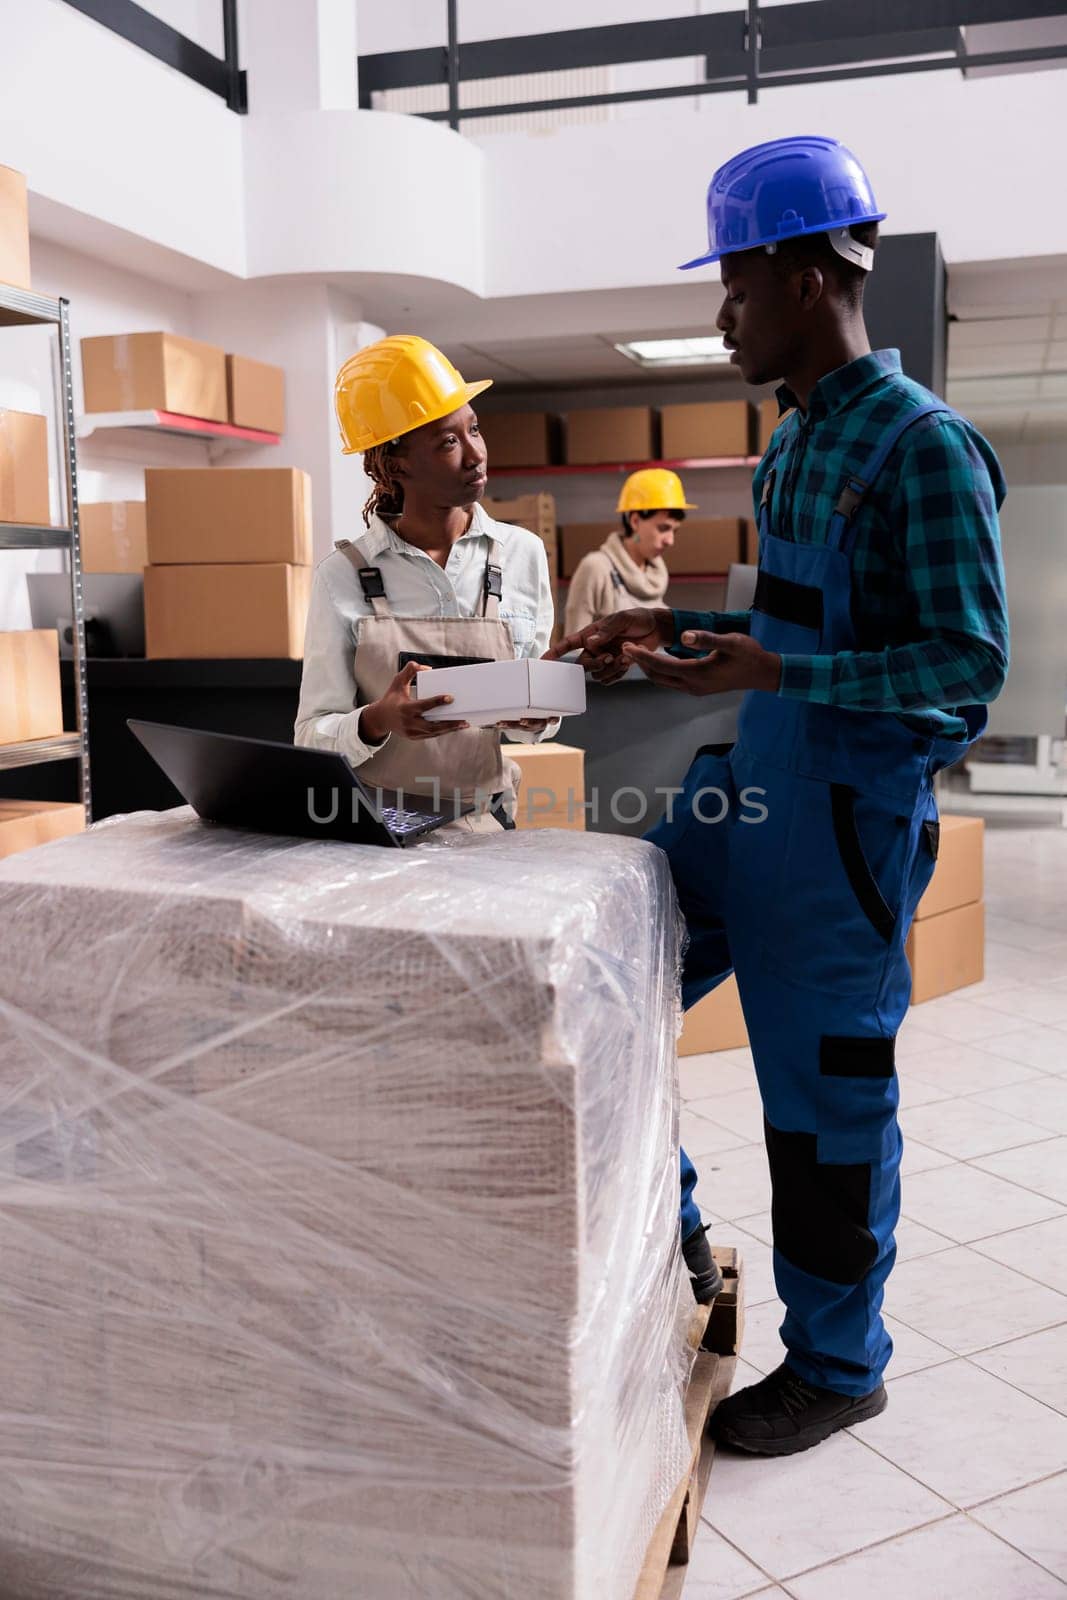 Shipping manager giving box and checking invoice on laptop by DCStudio